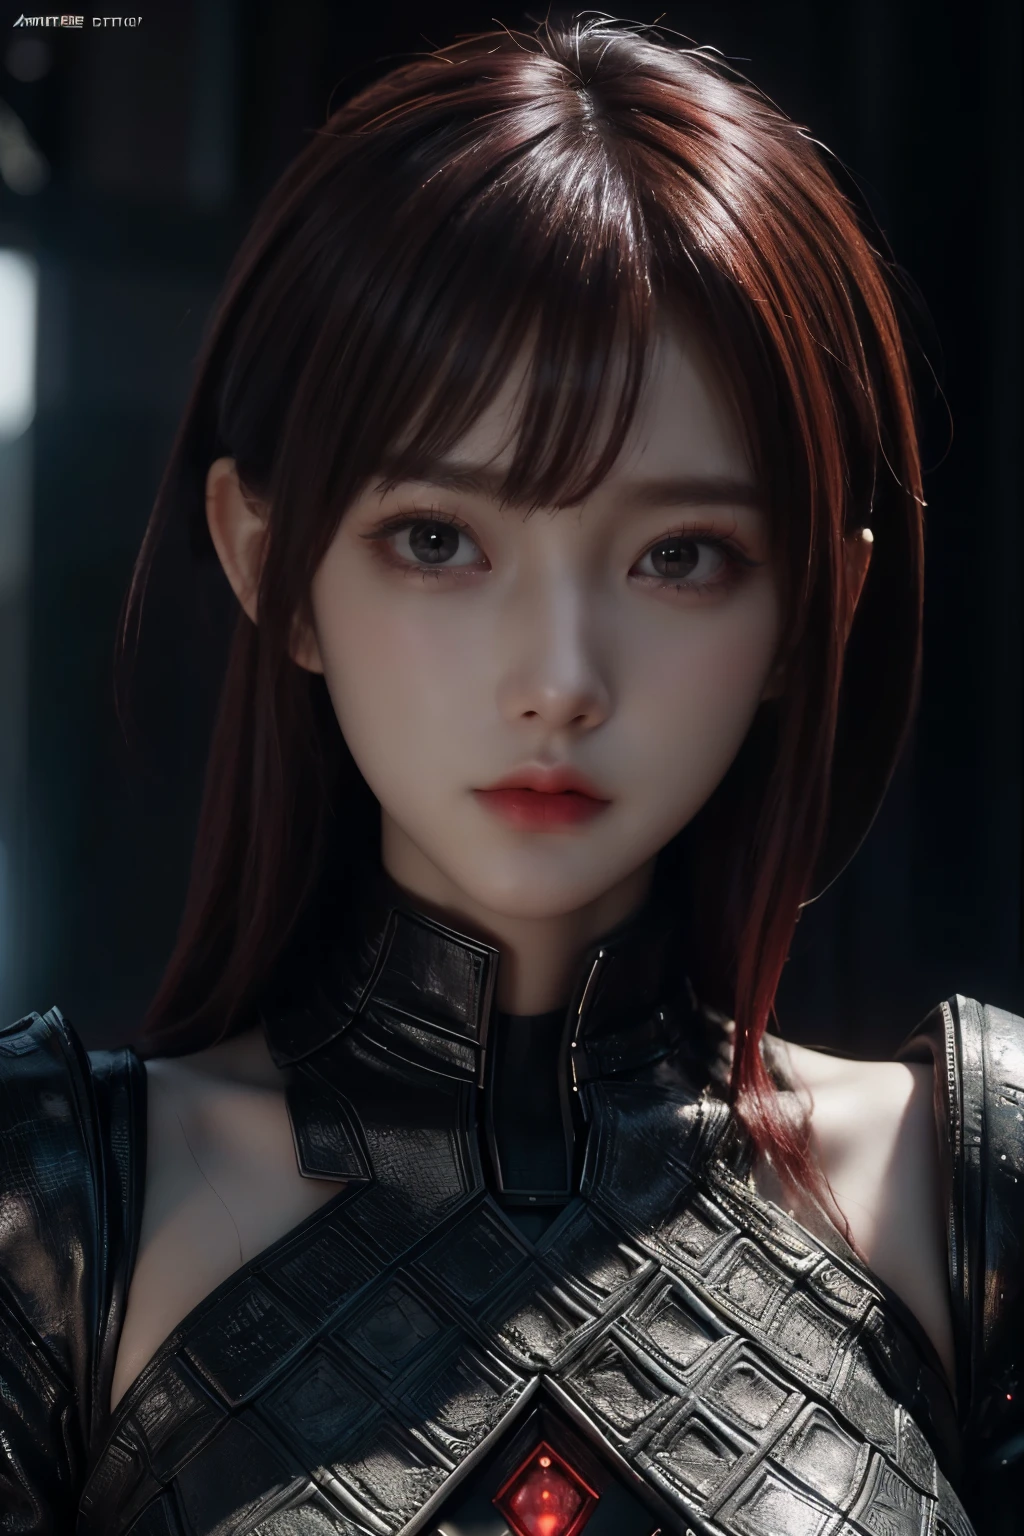 Masterpiece,Game art,The best picture quality,Highest resolution,8K,(Portrait),Unreal Engine 5 rendering works,(Digital Photography),((Portrait Feature:1.5)),
20 year old girl,Short hair details,With long bangs,(The red eye makeup is very meticulous),(With short red hair:1.4),(Large, full breasts),Elegant and noble,Brave and charming,
(Future armor combined with the characteristics of ancient Chinese armor,Hollow design,Power Armor,The mysterious Eastern runes,A delicate dress pattern,A flash of magic),Warrior of the future,Cyberpunk figures,Background of war,
Movie lights，Ray tracing，Game CG，((3D Unreal Engine))，OC rendering reflection pattern